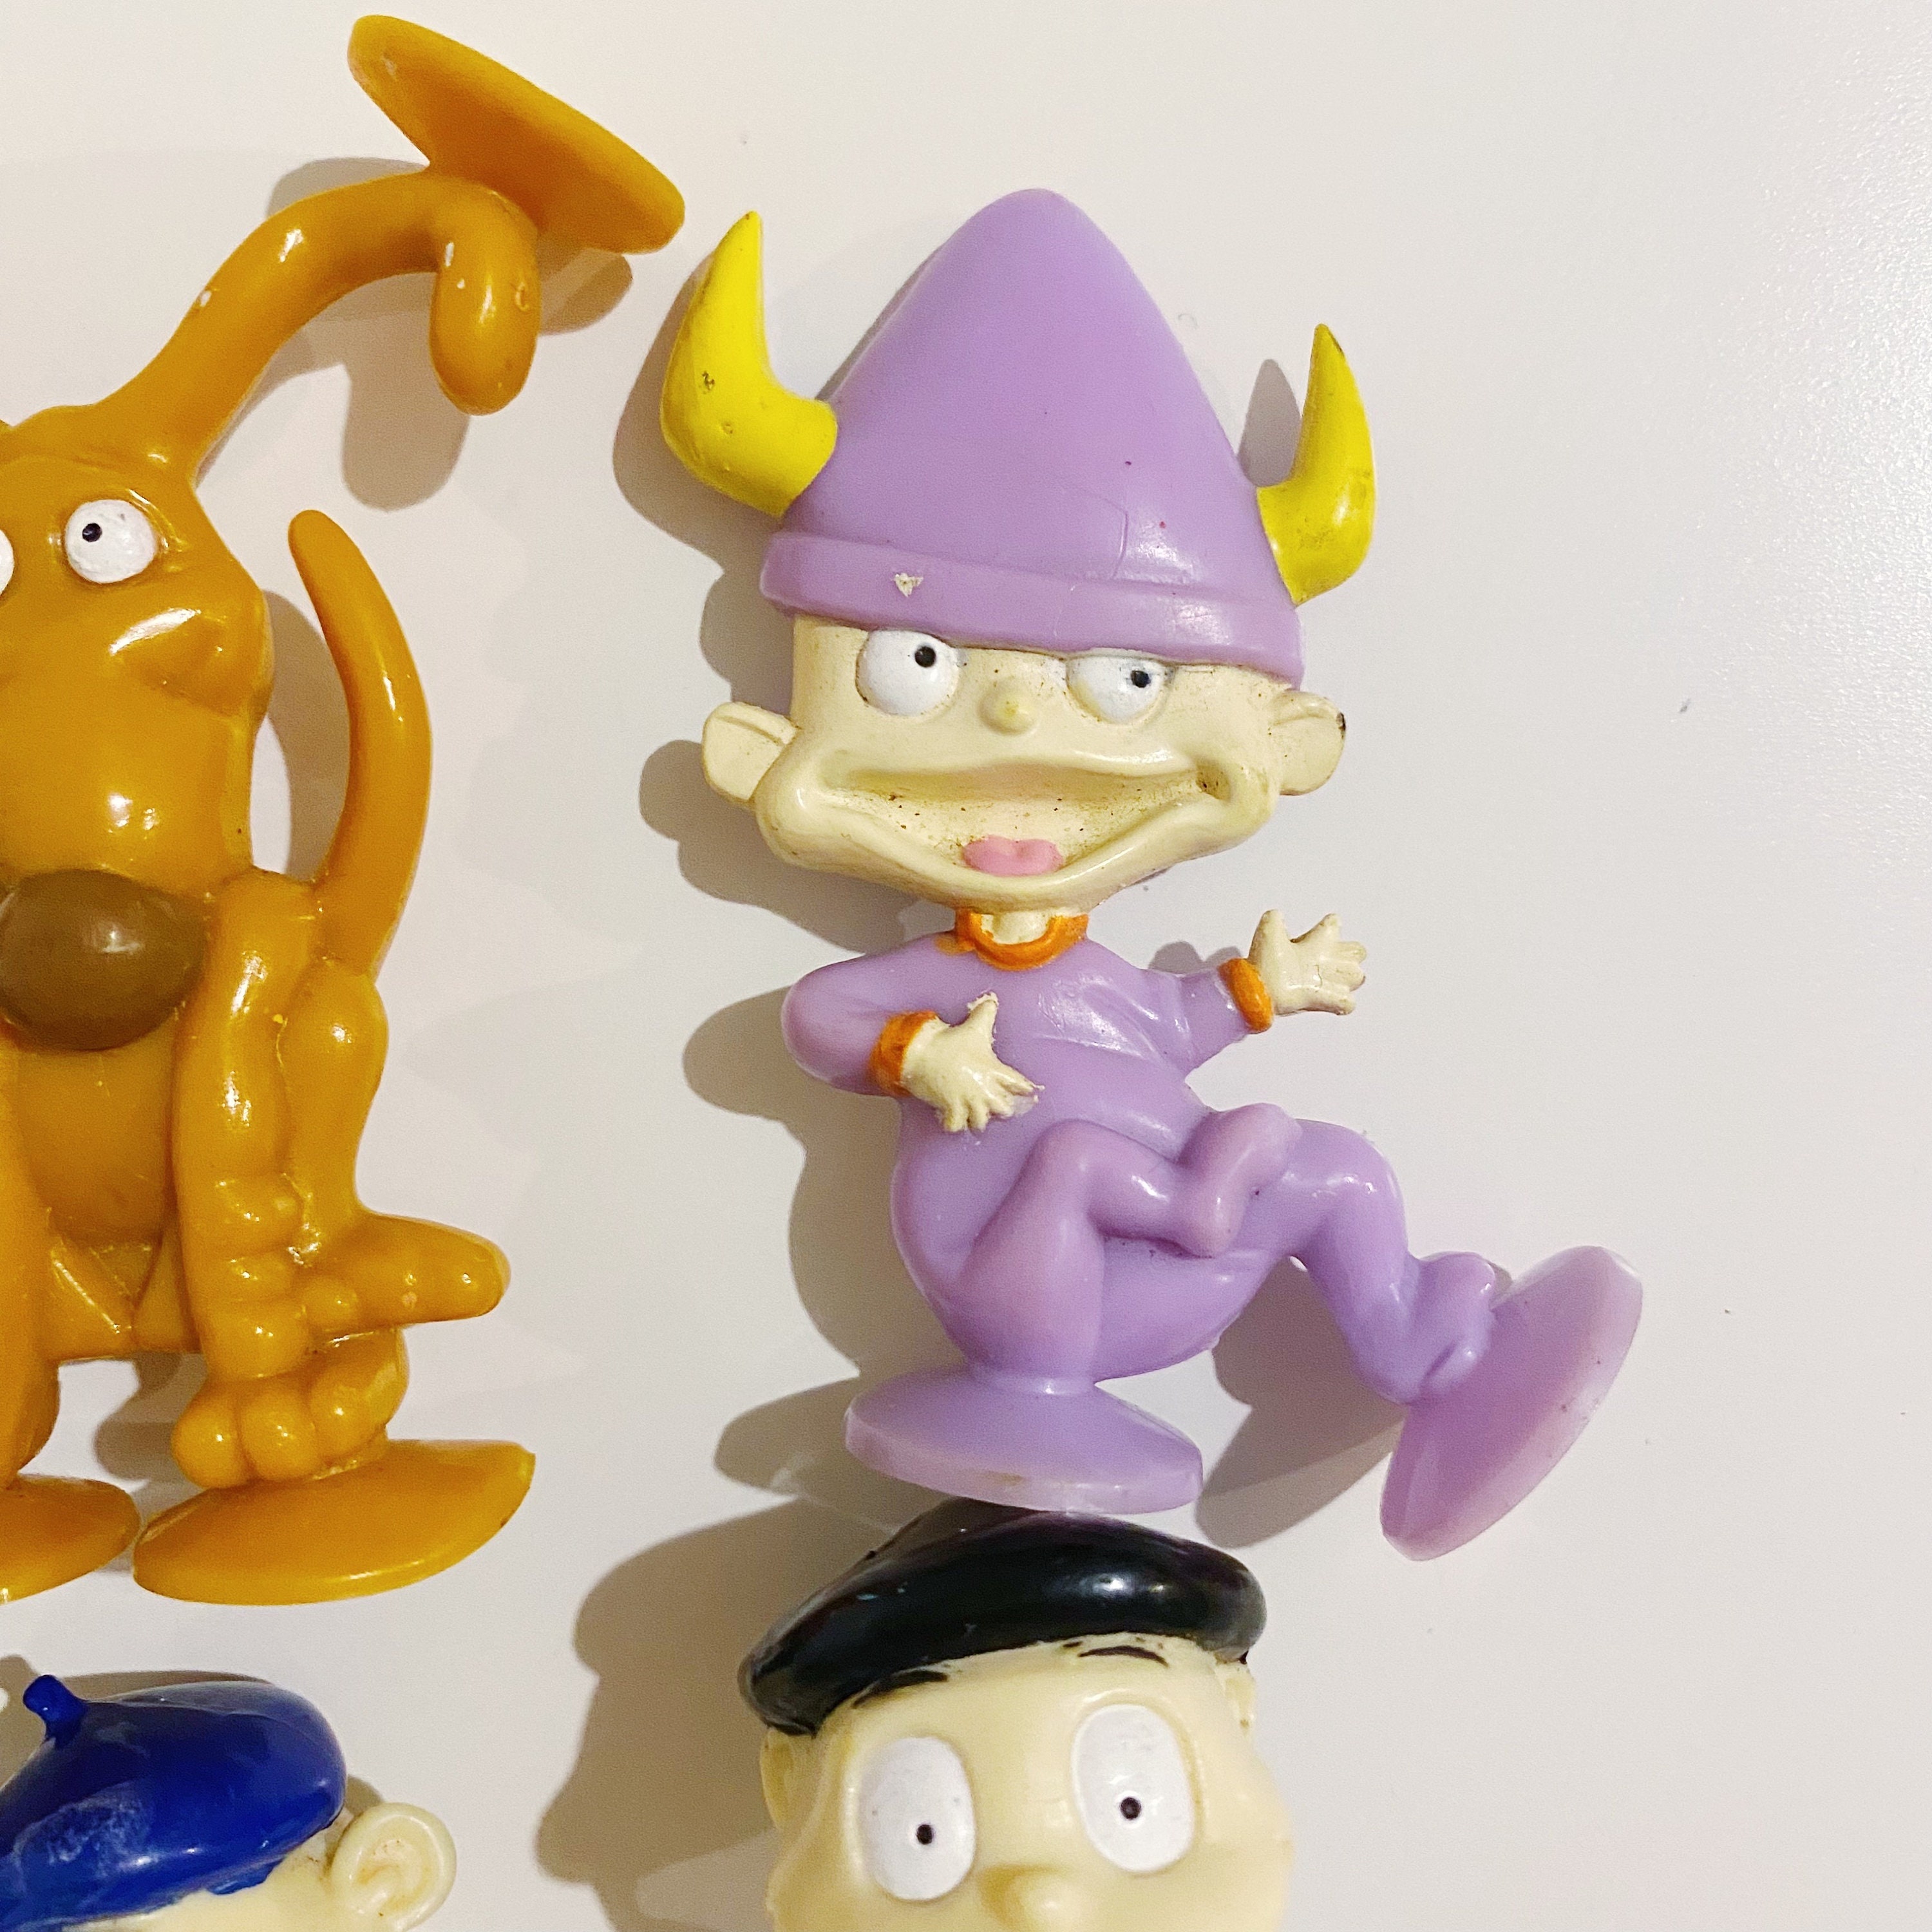 Lot of 6 Vintage Rugrats Toys Figures 90s Nickelodeon Bulk - Etsy